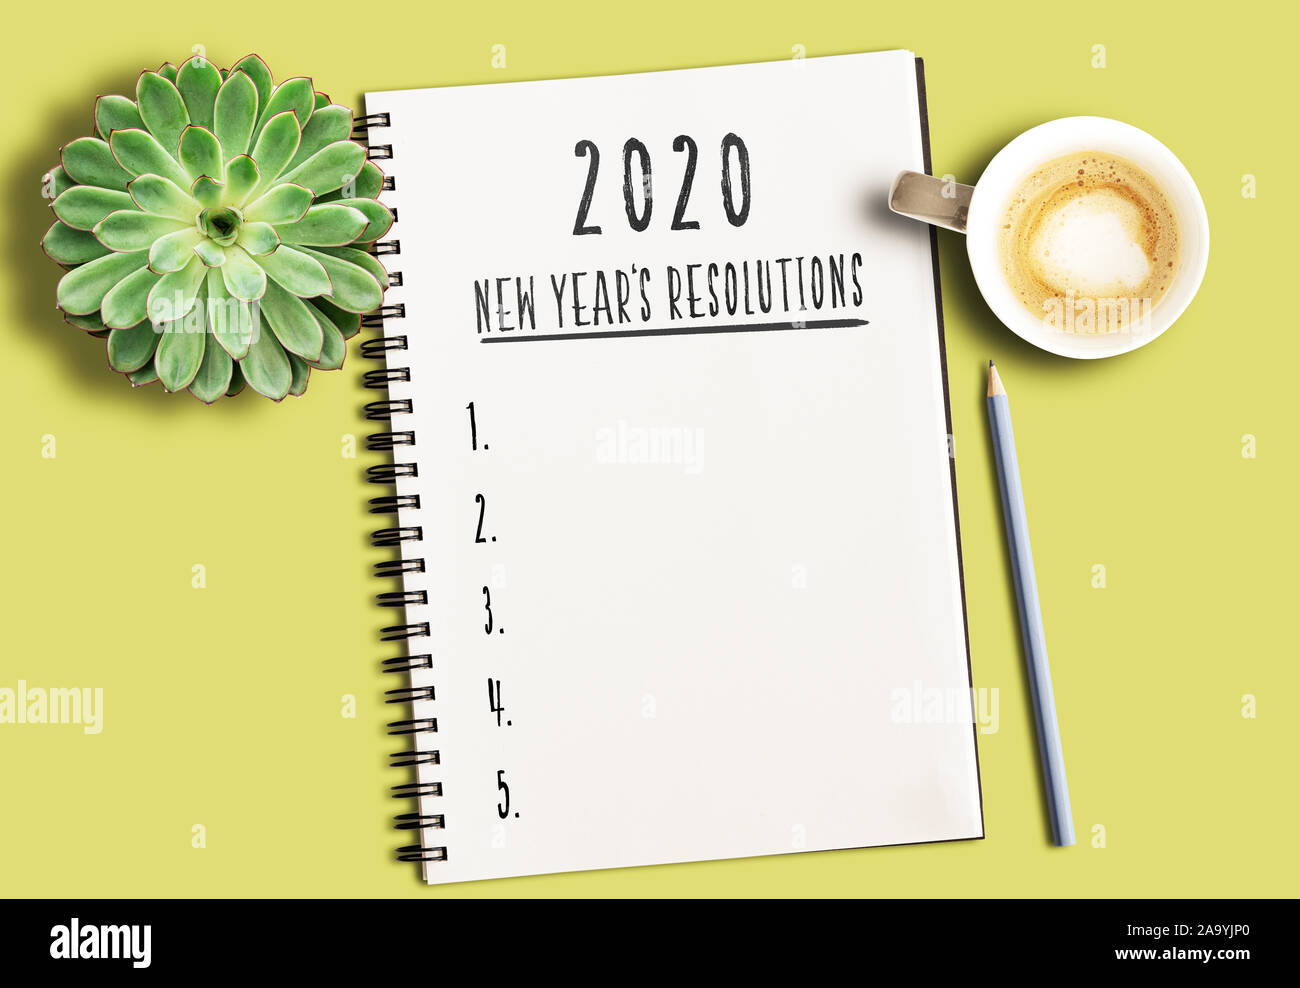 top view of notepad with text 2020 New Years Resolutions and numbered list on yellow desk with succulent plant and cup of coffee Stock Photo